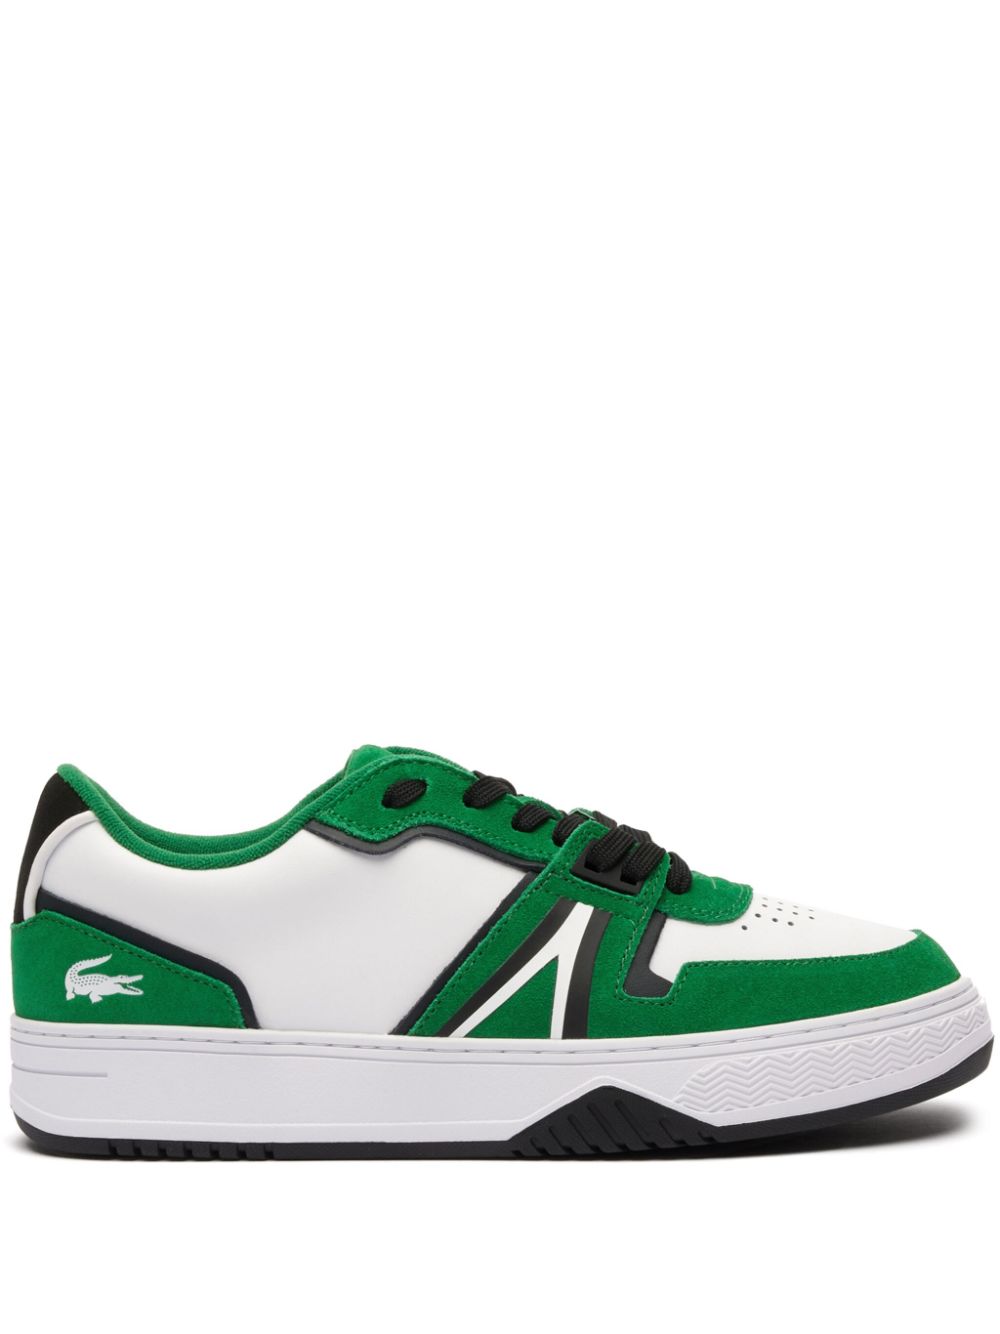 LACOSTE L001 COATED LEATHER SNEAKERS